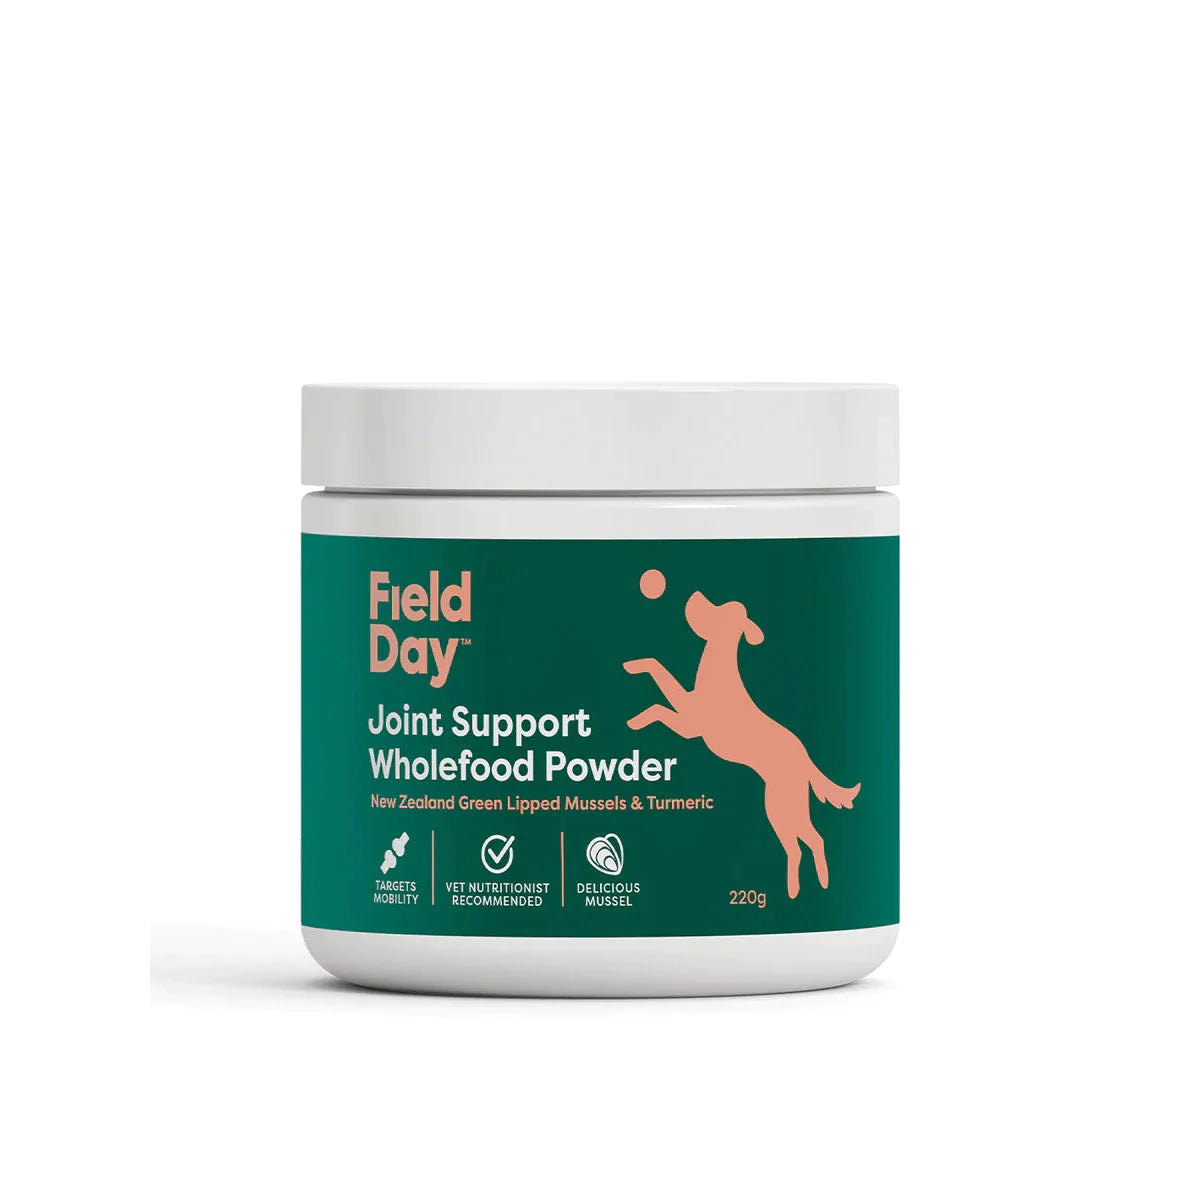 Field Day Joint Support Wholefood Powder Supplement 220g